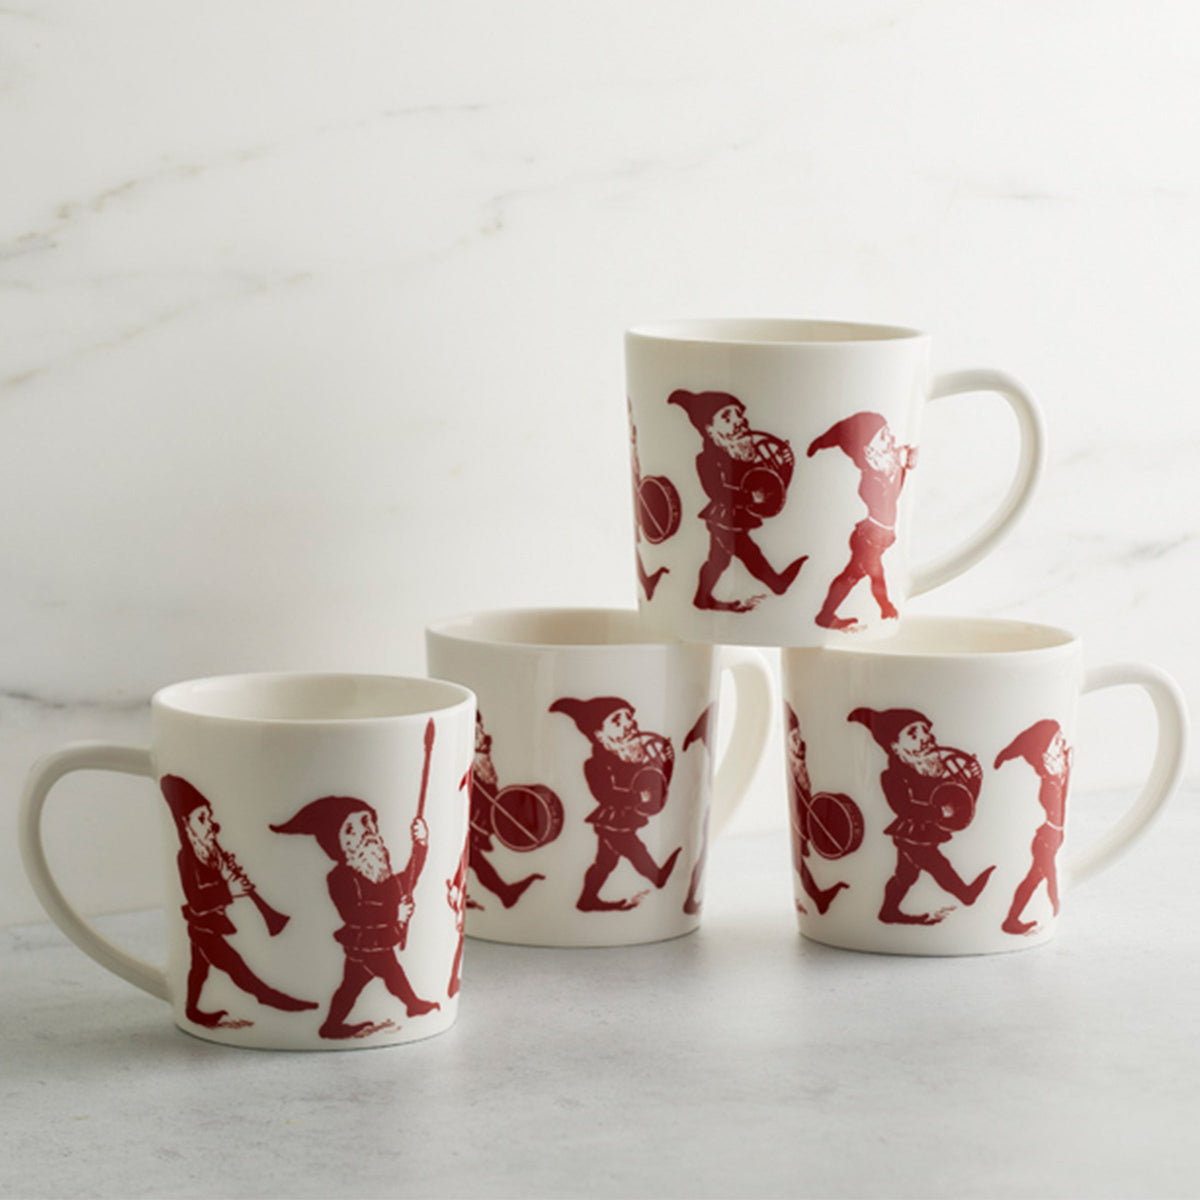 Four Elves Mugs Red with red and white designs, perfect for a holiday table or as a holiday gift. (Caskata Artisanal Home)